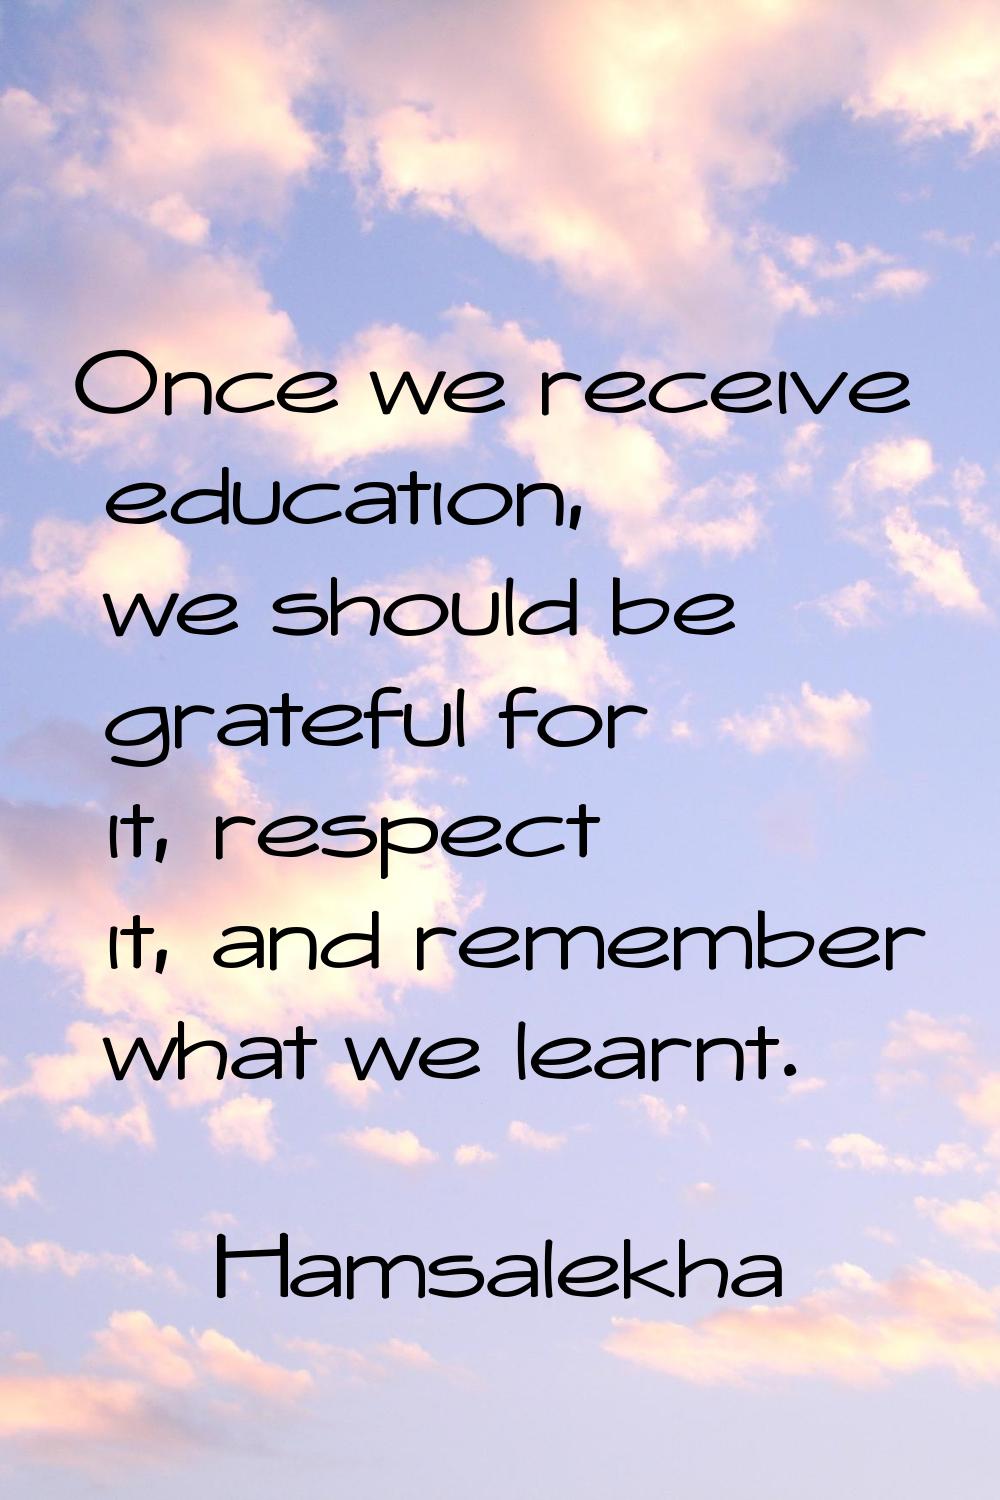 Once we receive education, we should be grateful for it, respect it, and remember what we learnt.